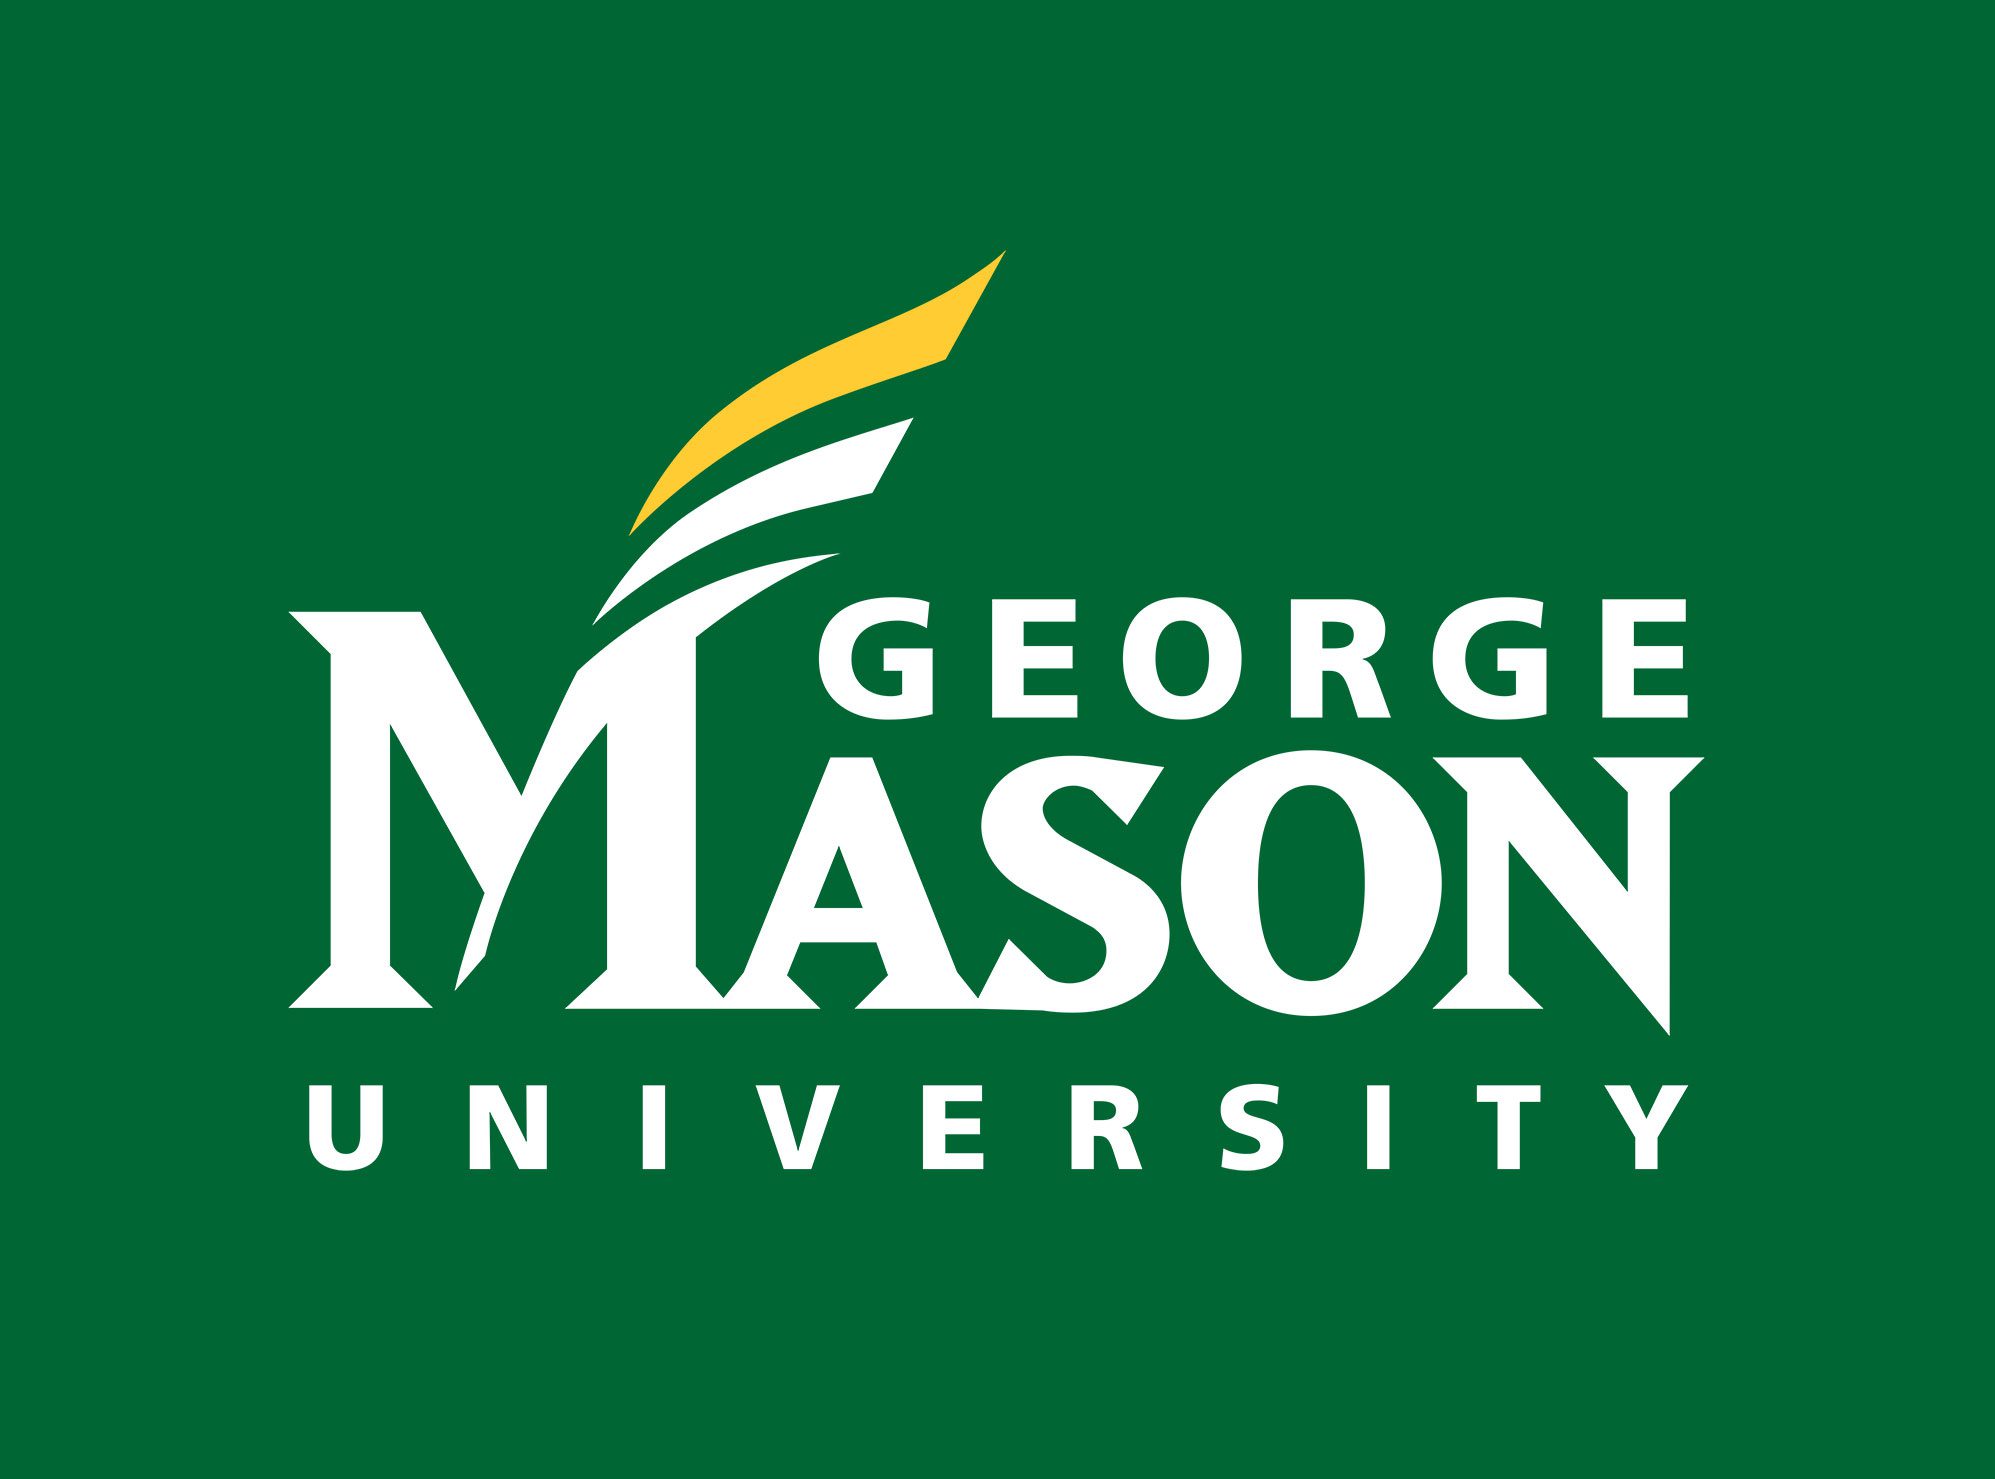 PUBLIC SECTOR AUTOMATION LEADER JIM WALKER JOINS GMU’S BOARD OF ADVISORS FOR RPA INITIATIVES